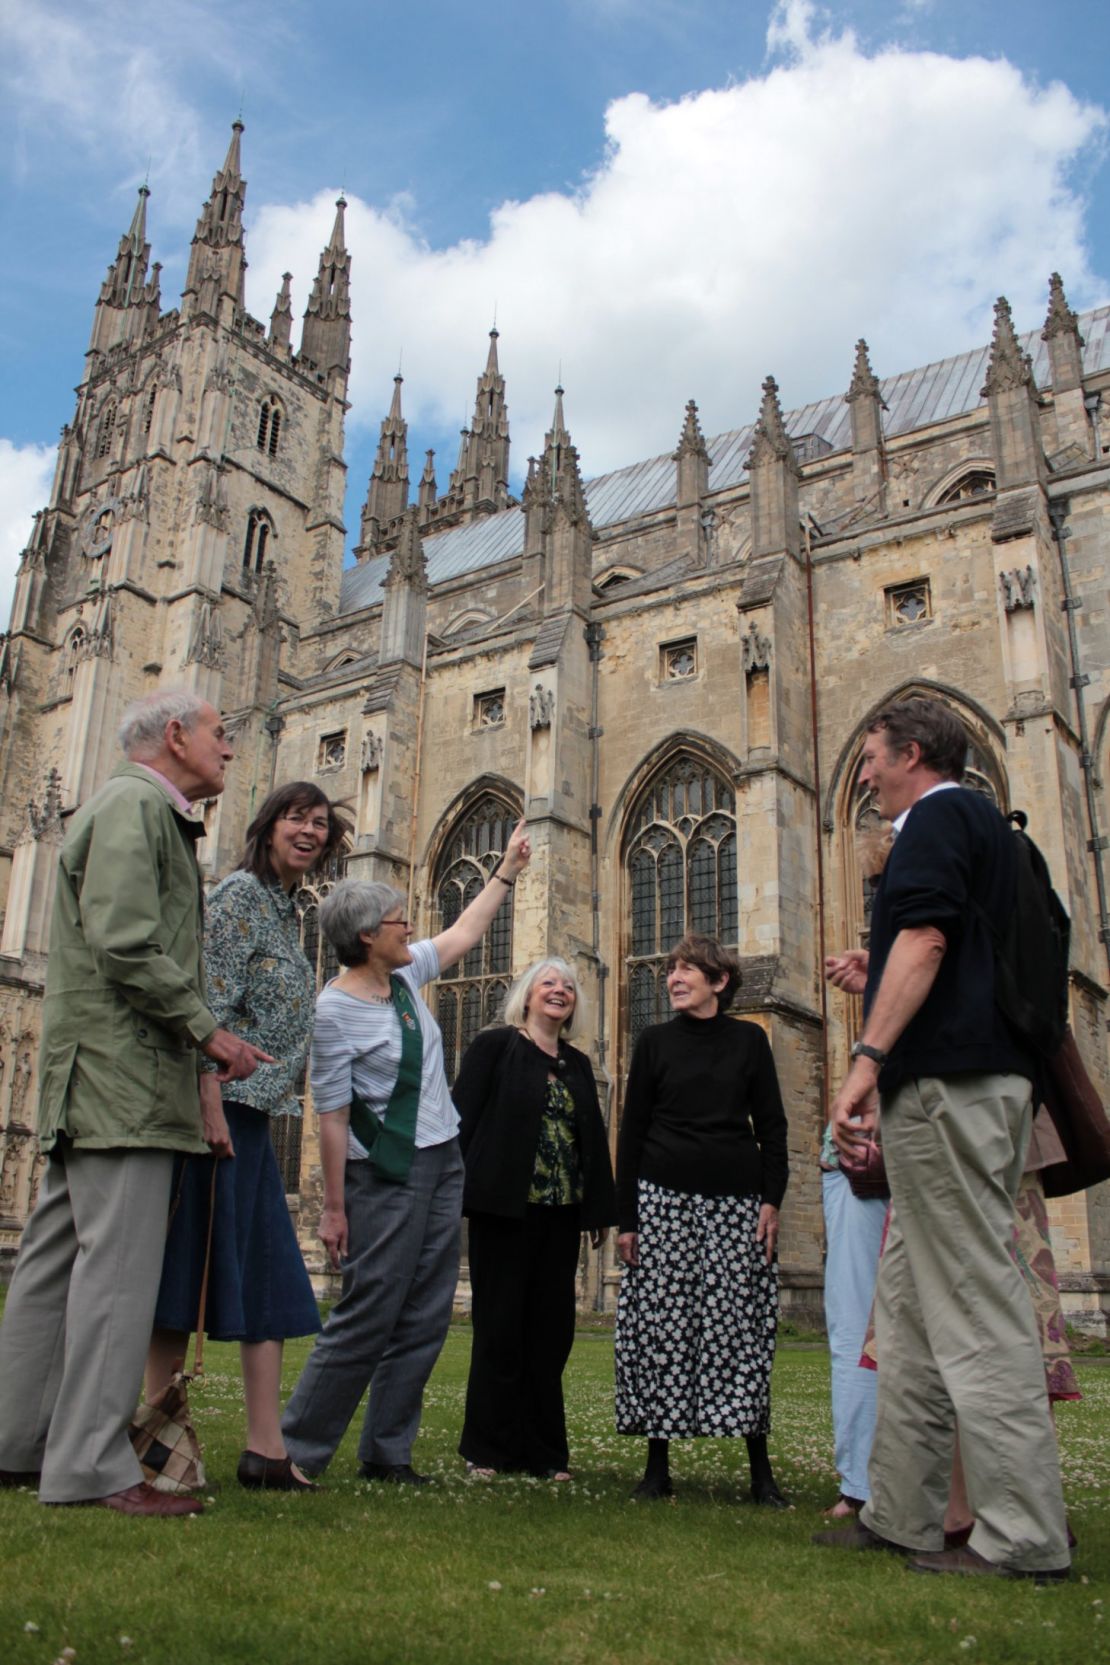 Vistors go to Canterbury Cathedral, where knights under orders of Henry II killed Thomas Becket.